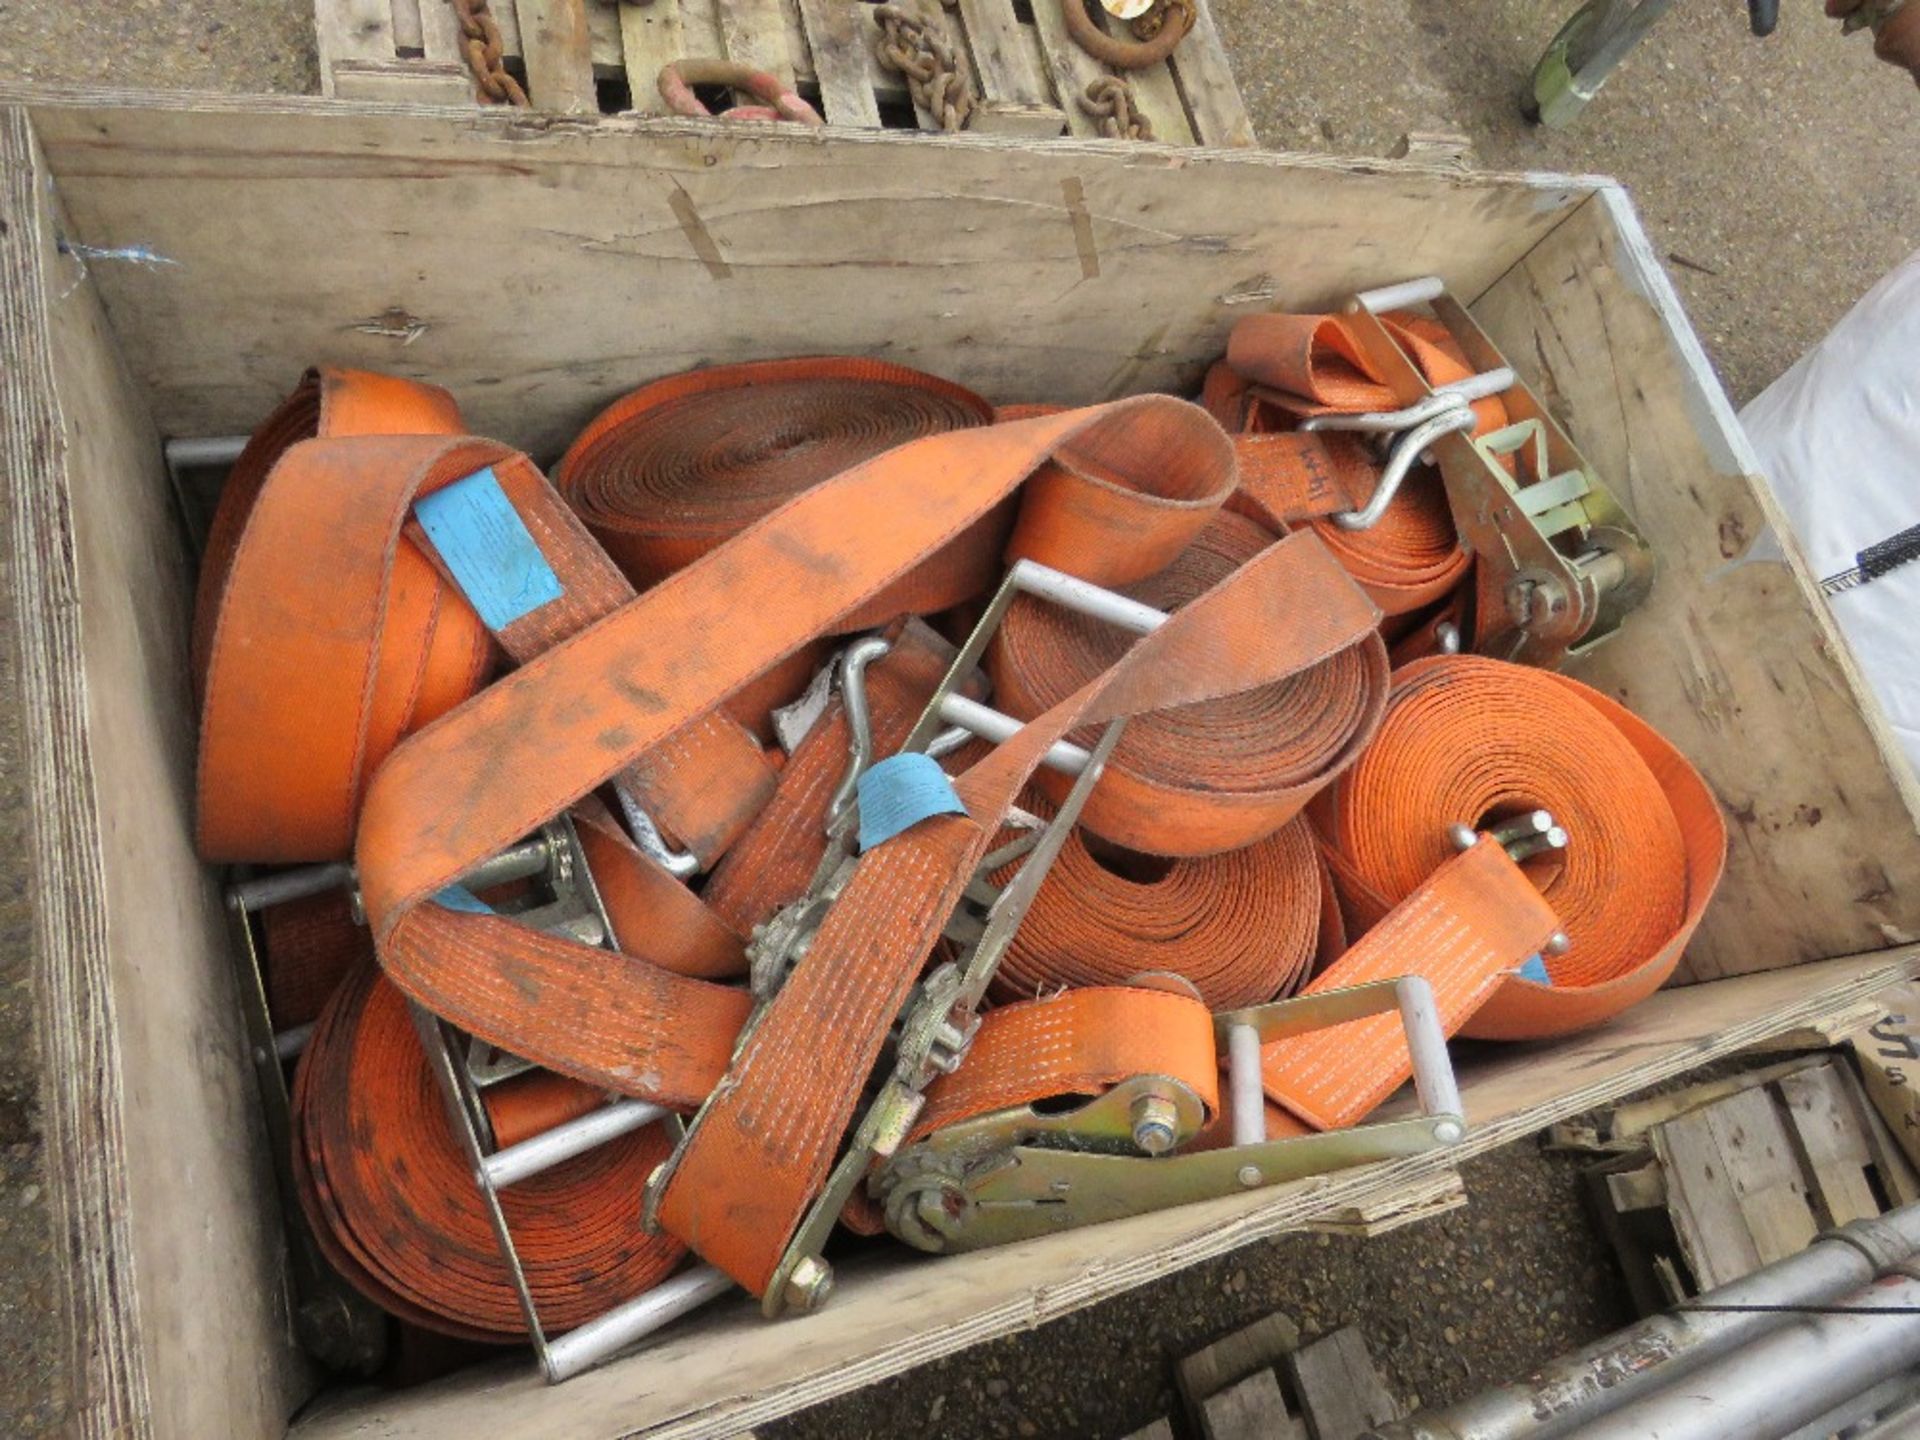 STILLAGE CONTAINING HEAVY DUTY 10TONNE RATED RATCHET STRAPS. - Image 2 of 2